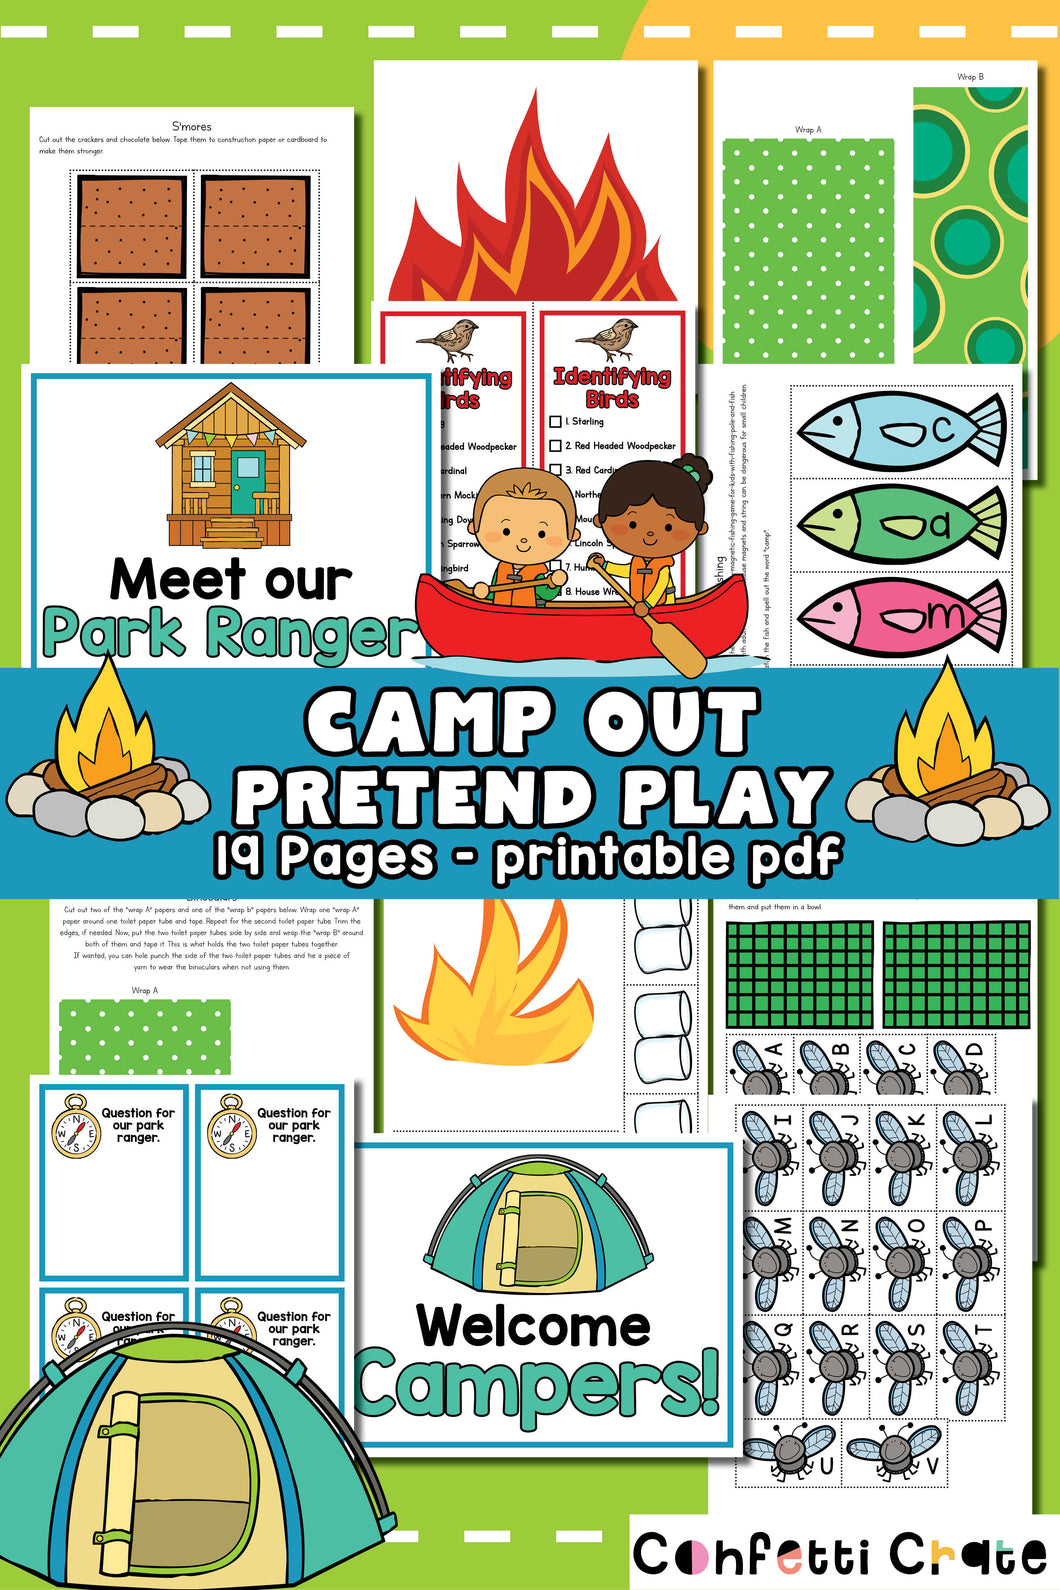 Camp out pretend play printables.